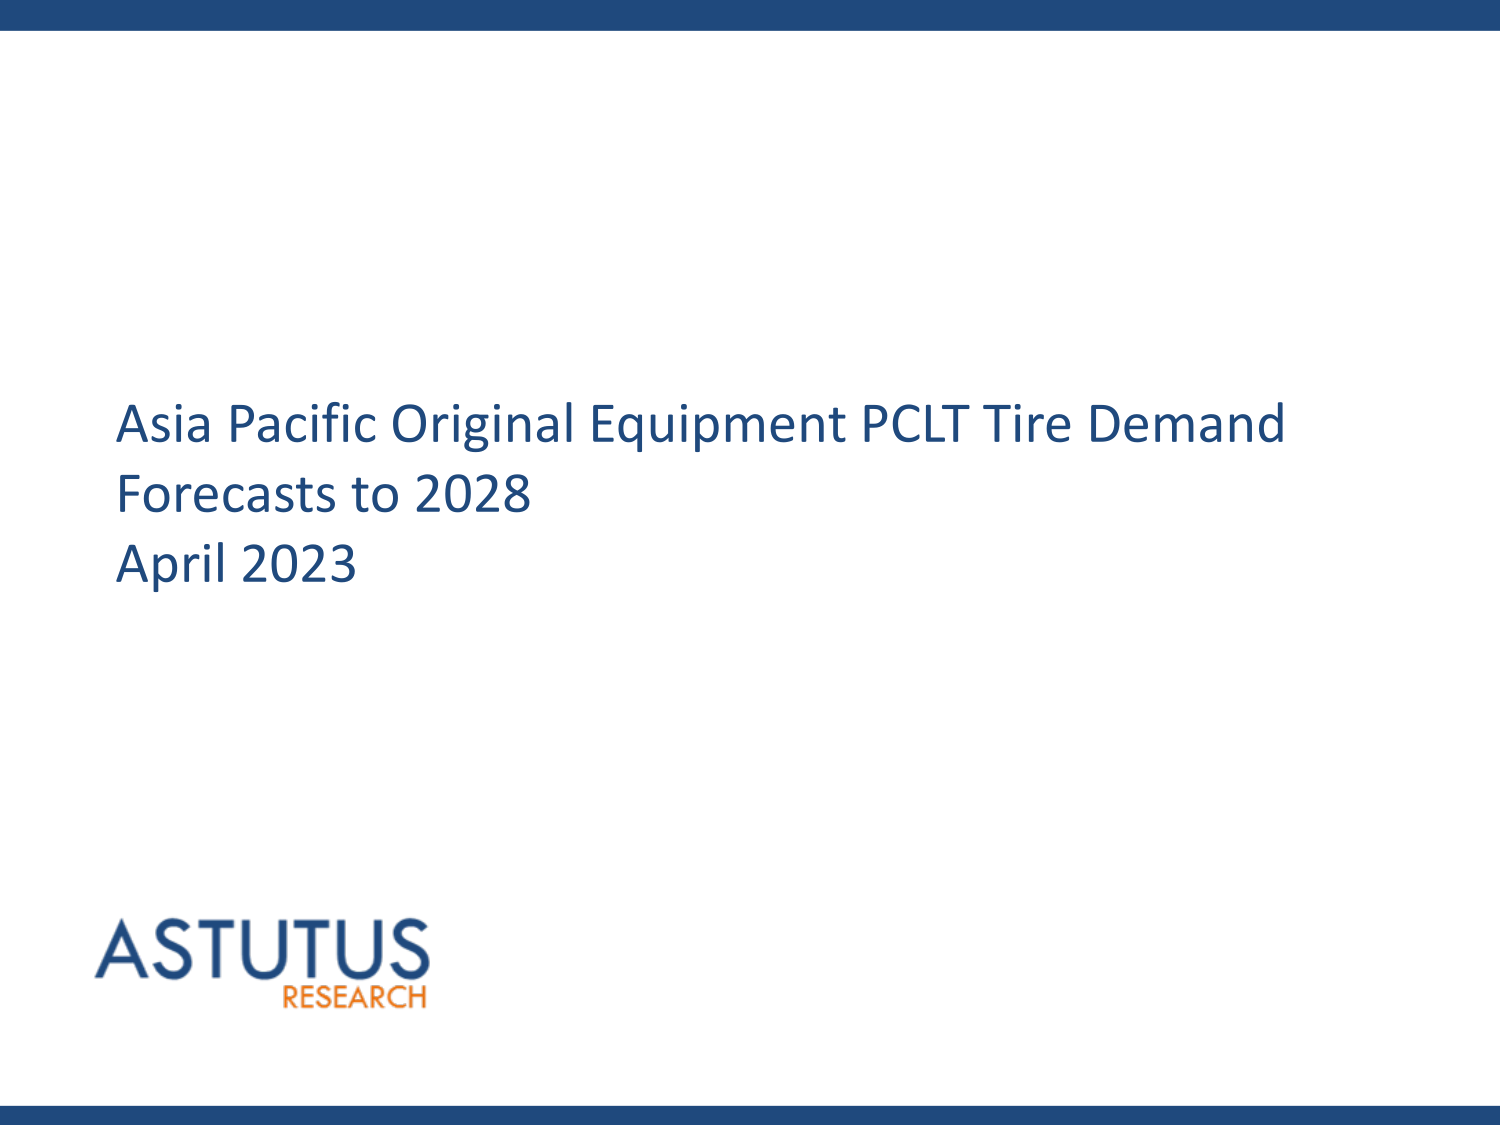 Asia Pacific Original Equipment PCLT Tire Market Forecasts to 2028